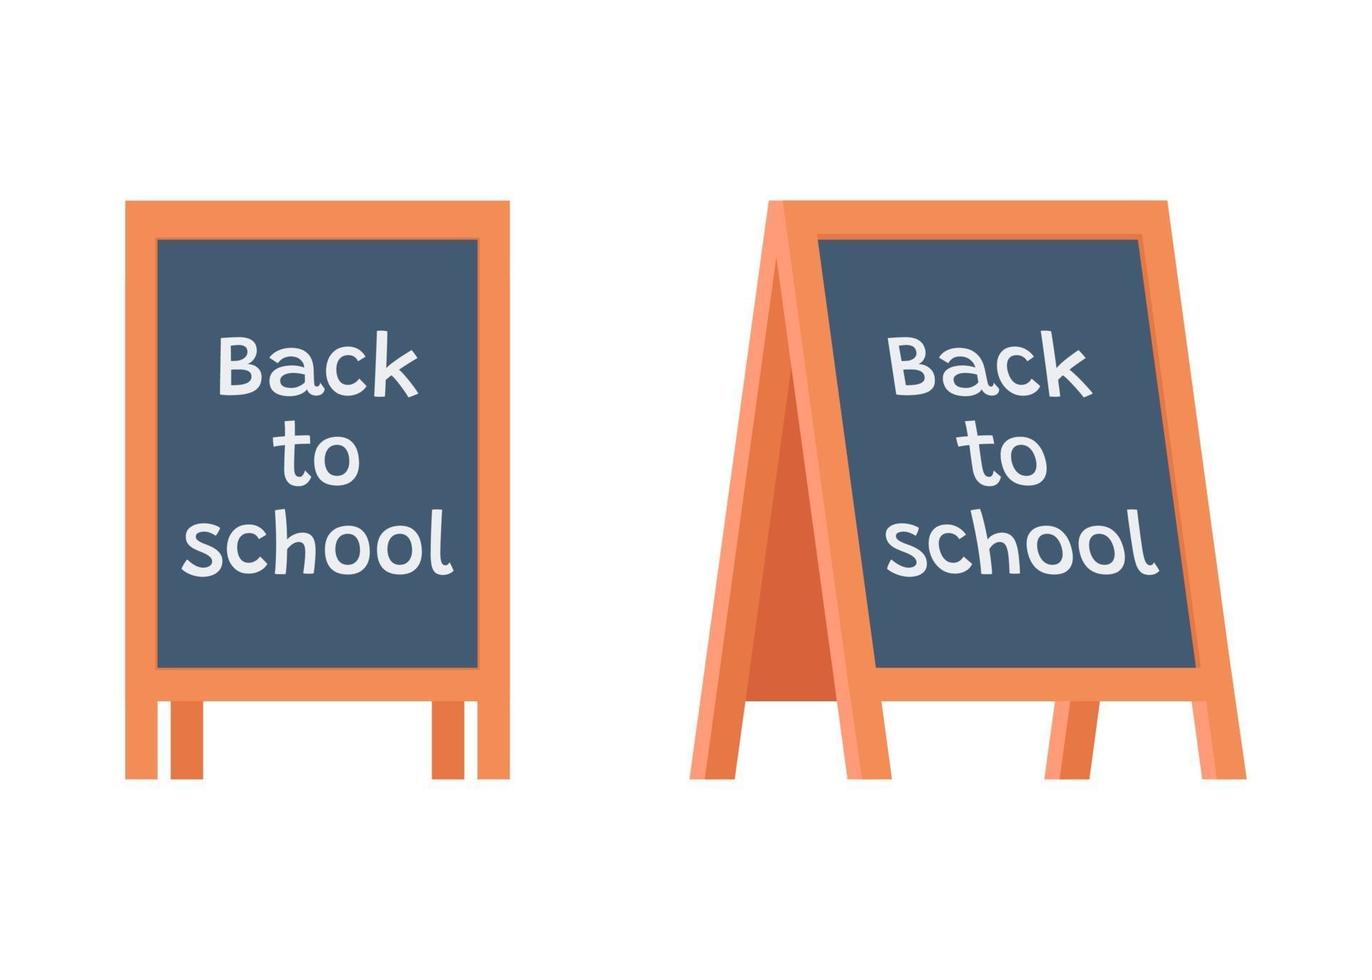 Blackboard, stand, chalkboard on education with title Back to school vector